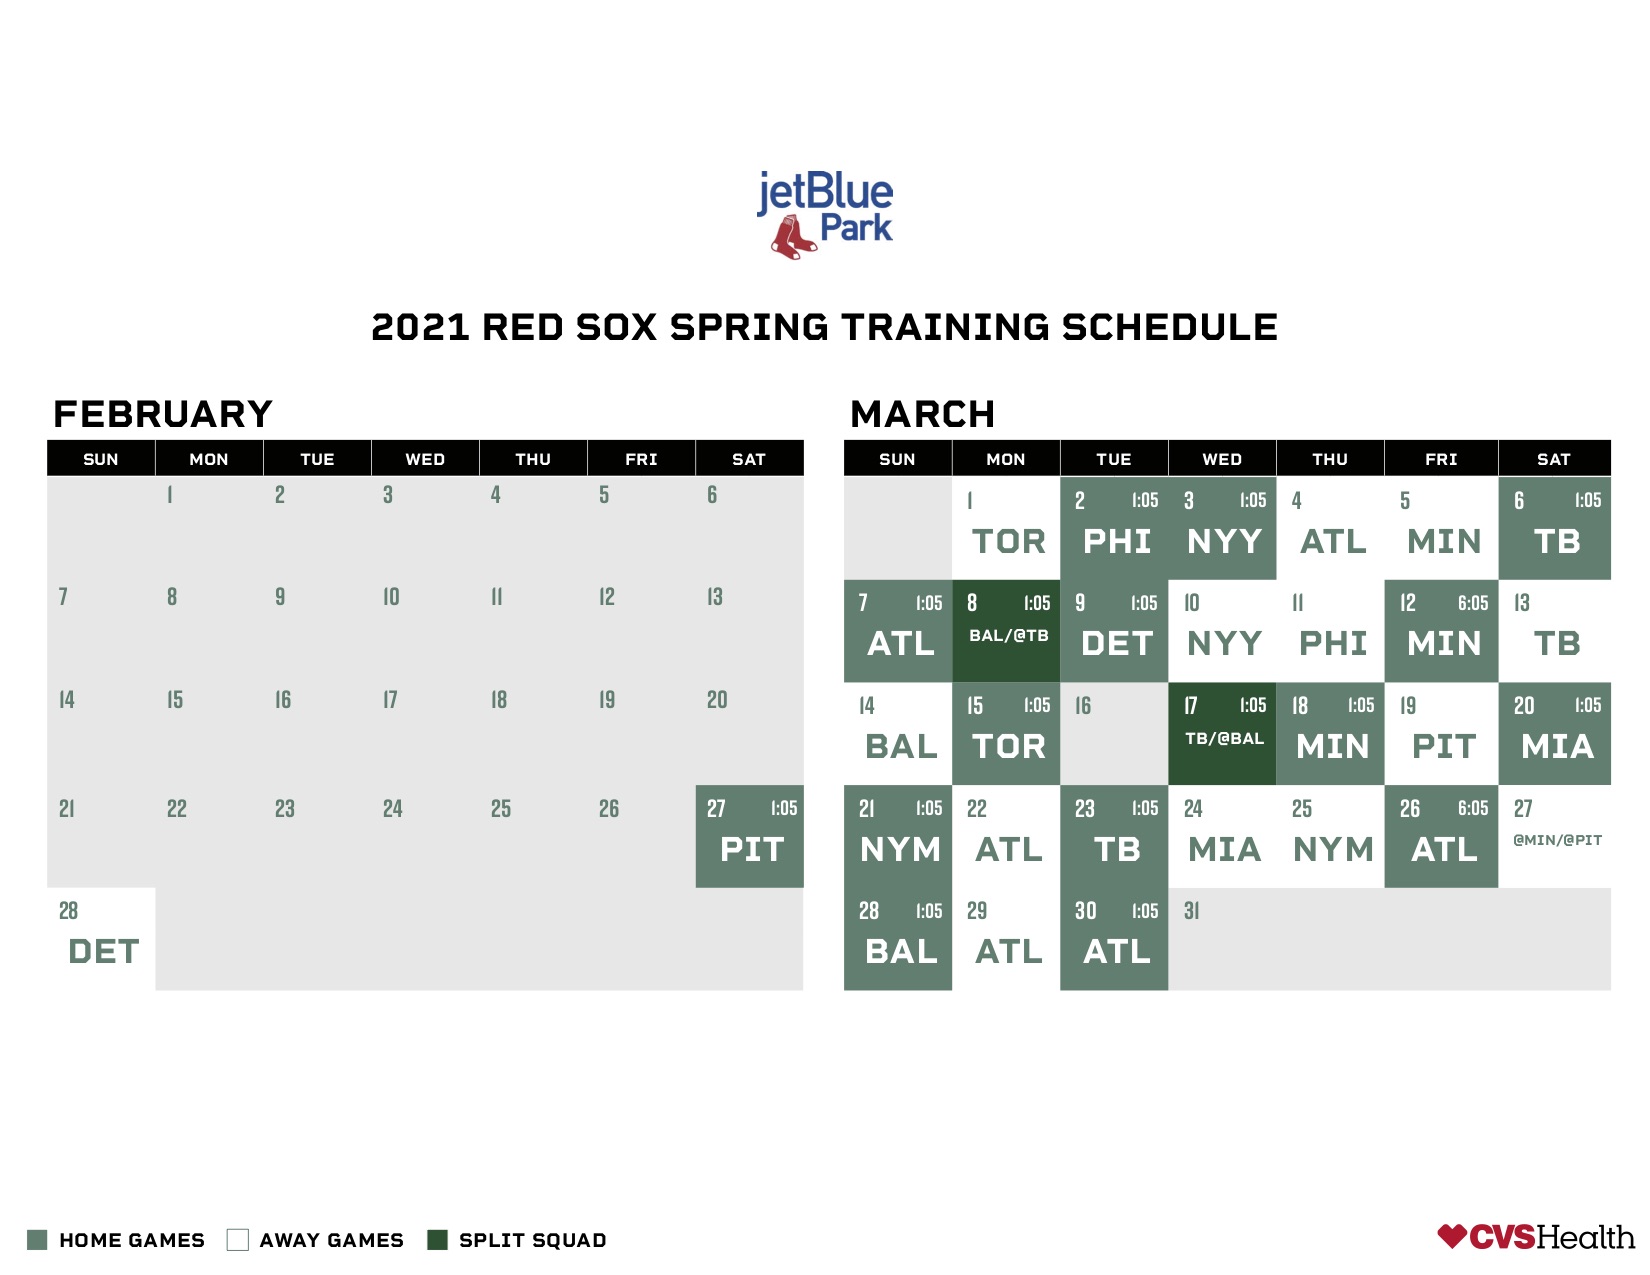 Red Sox announce that a restricted spring training will begin Feb. 17 - The Boston Globe